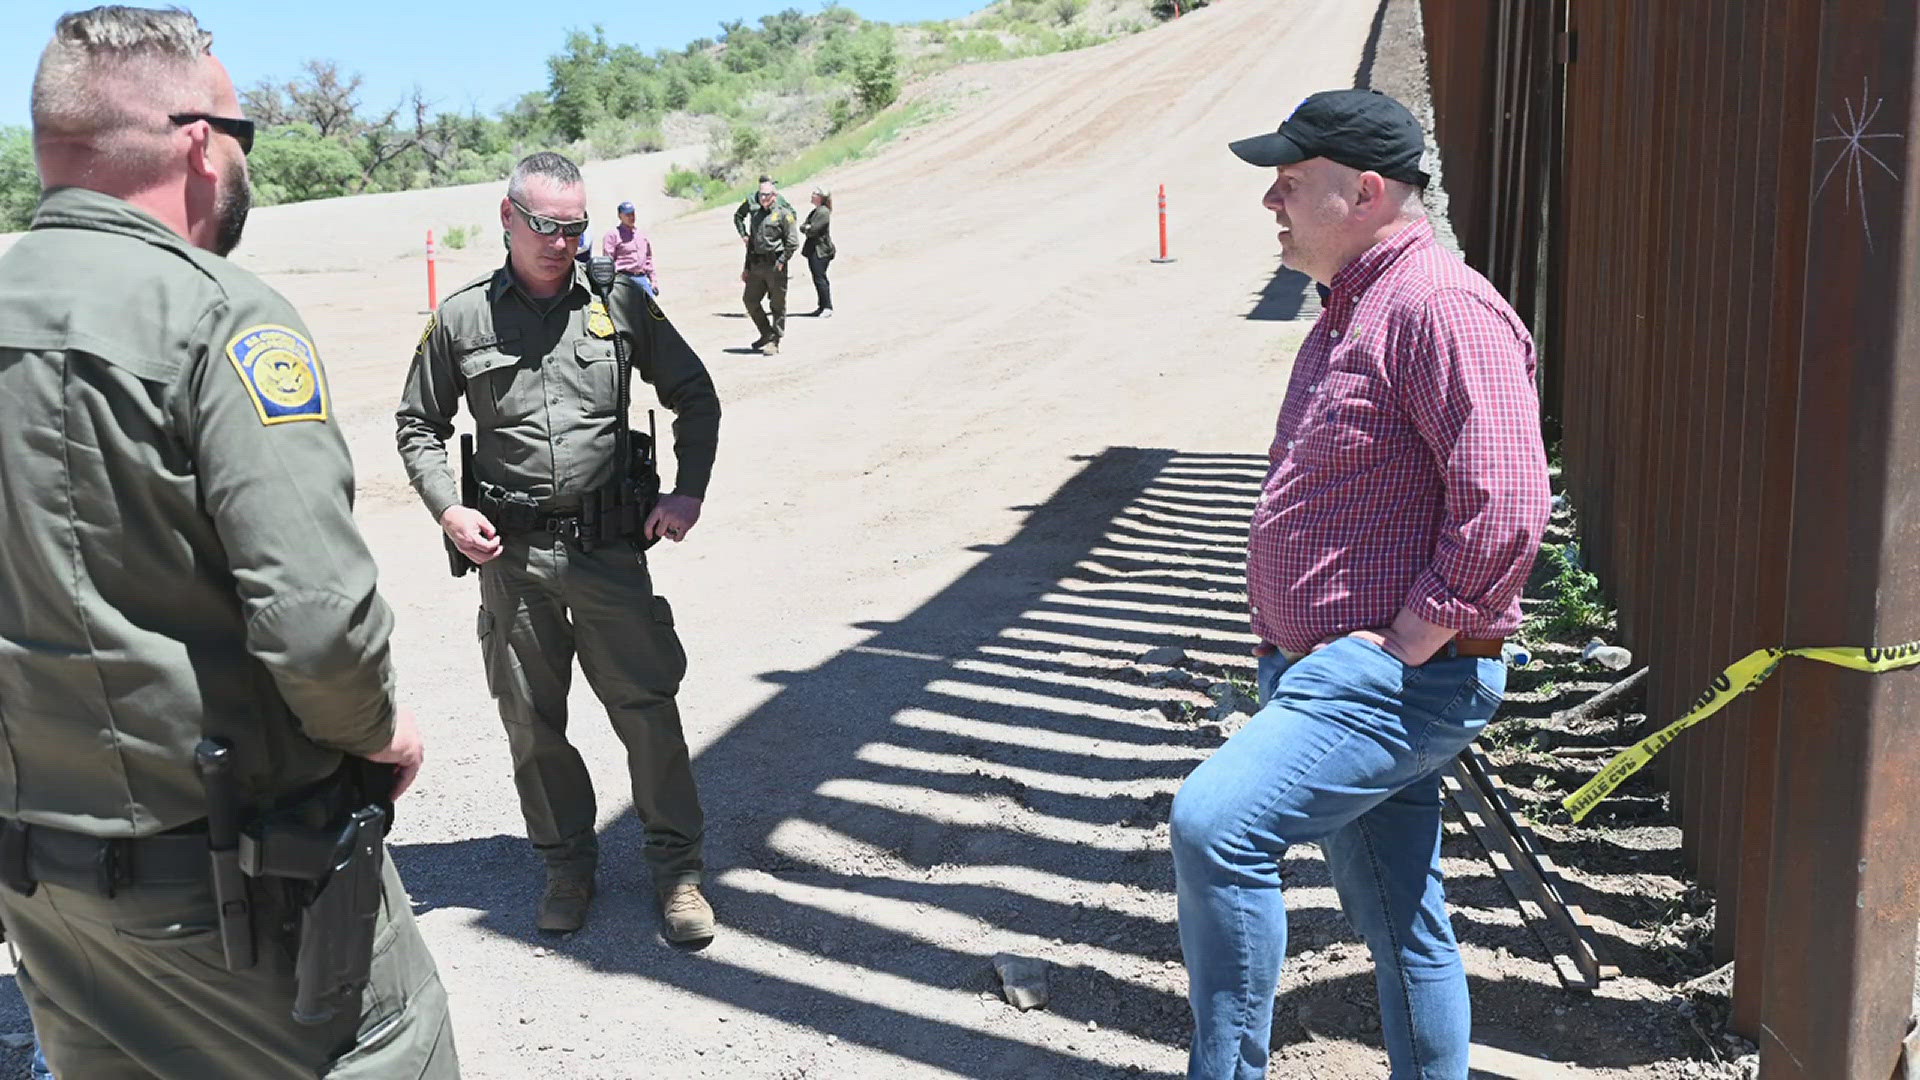 Sorensen was part of a bipartisan group of lawmakers who toured both sides of the border near Nogales, Arizona.